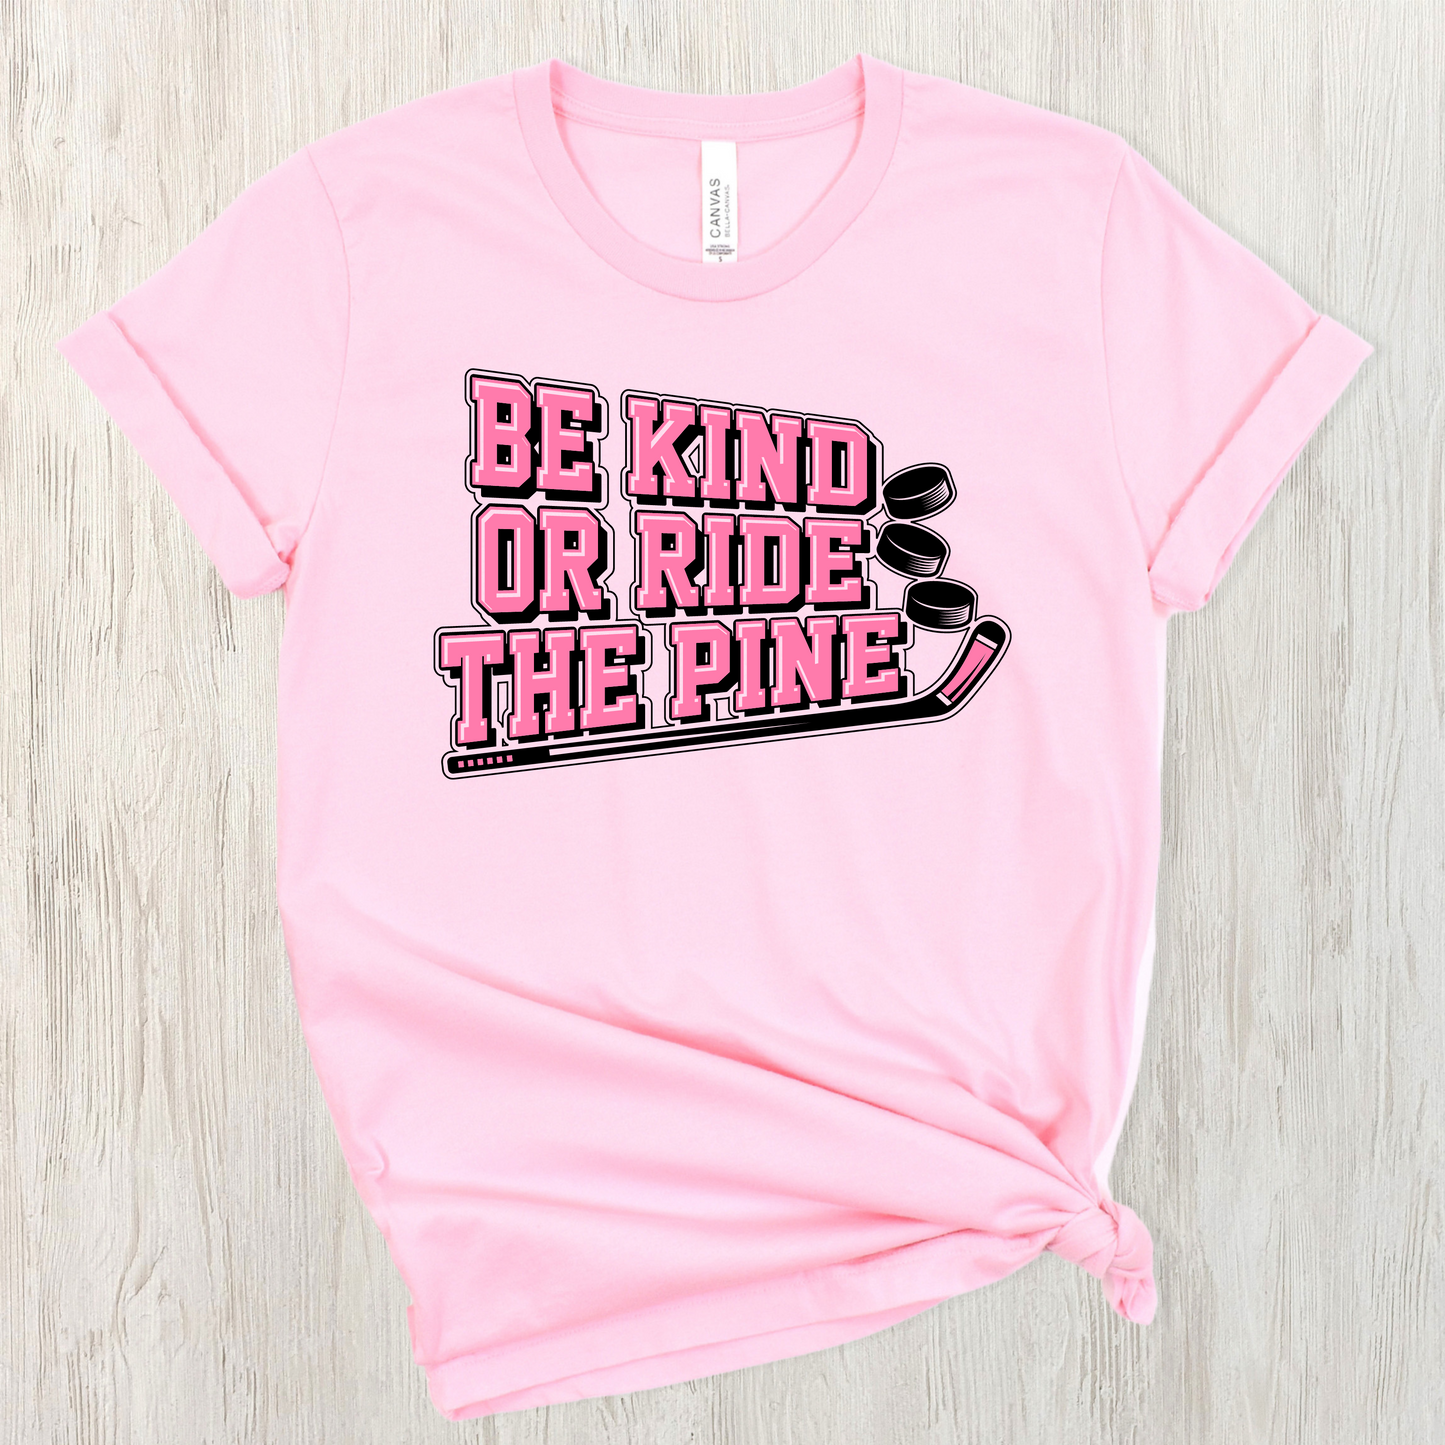 Anti Bulling day T shirt - Be Kind or ride the pine